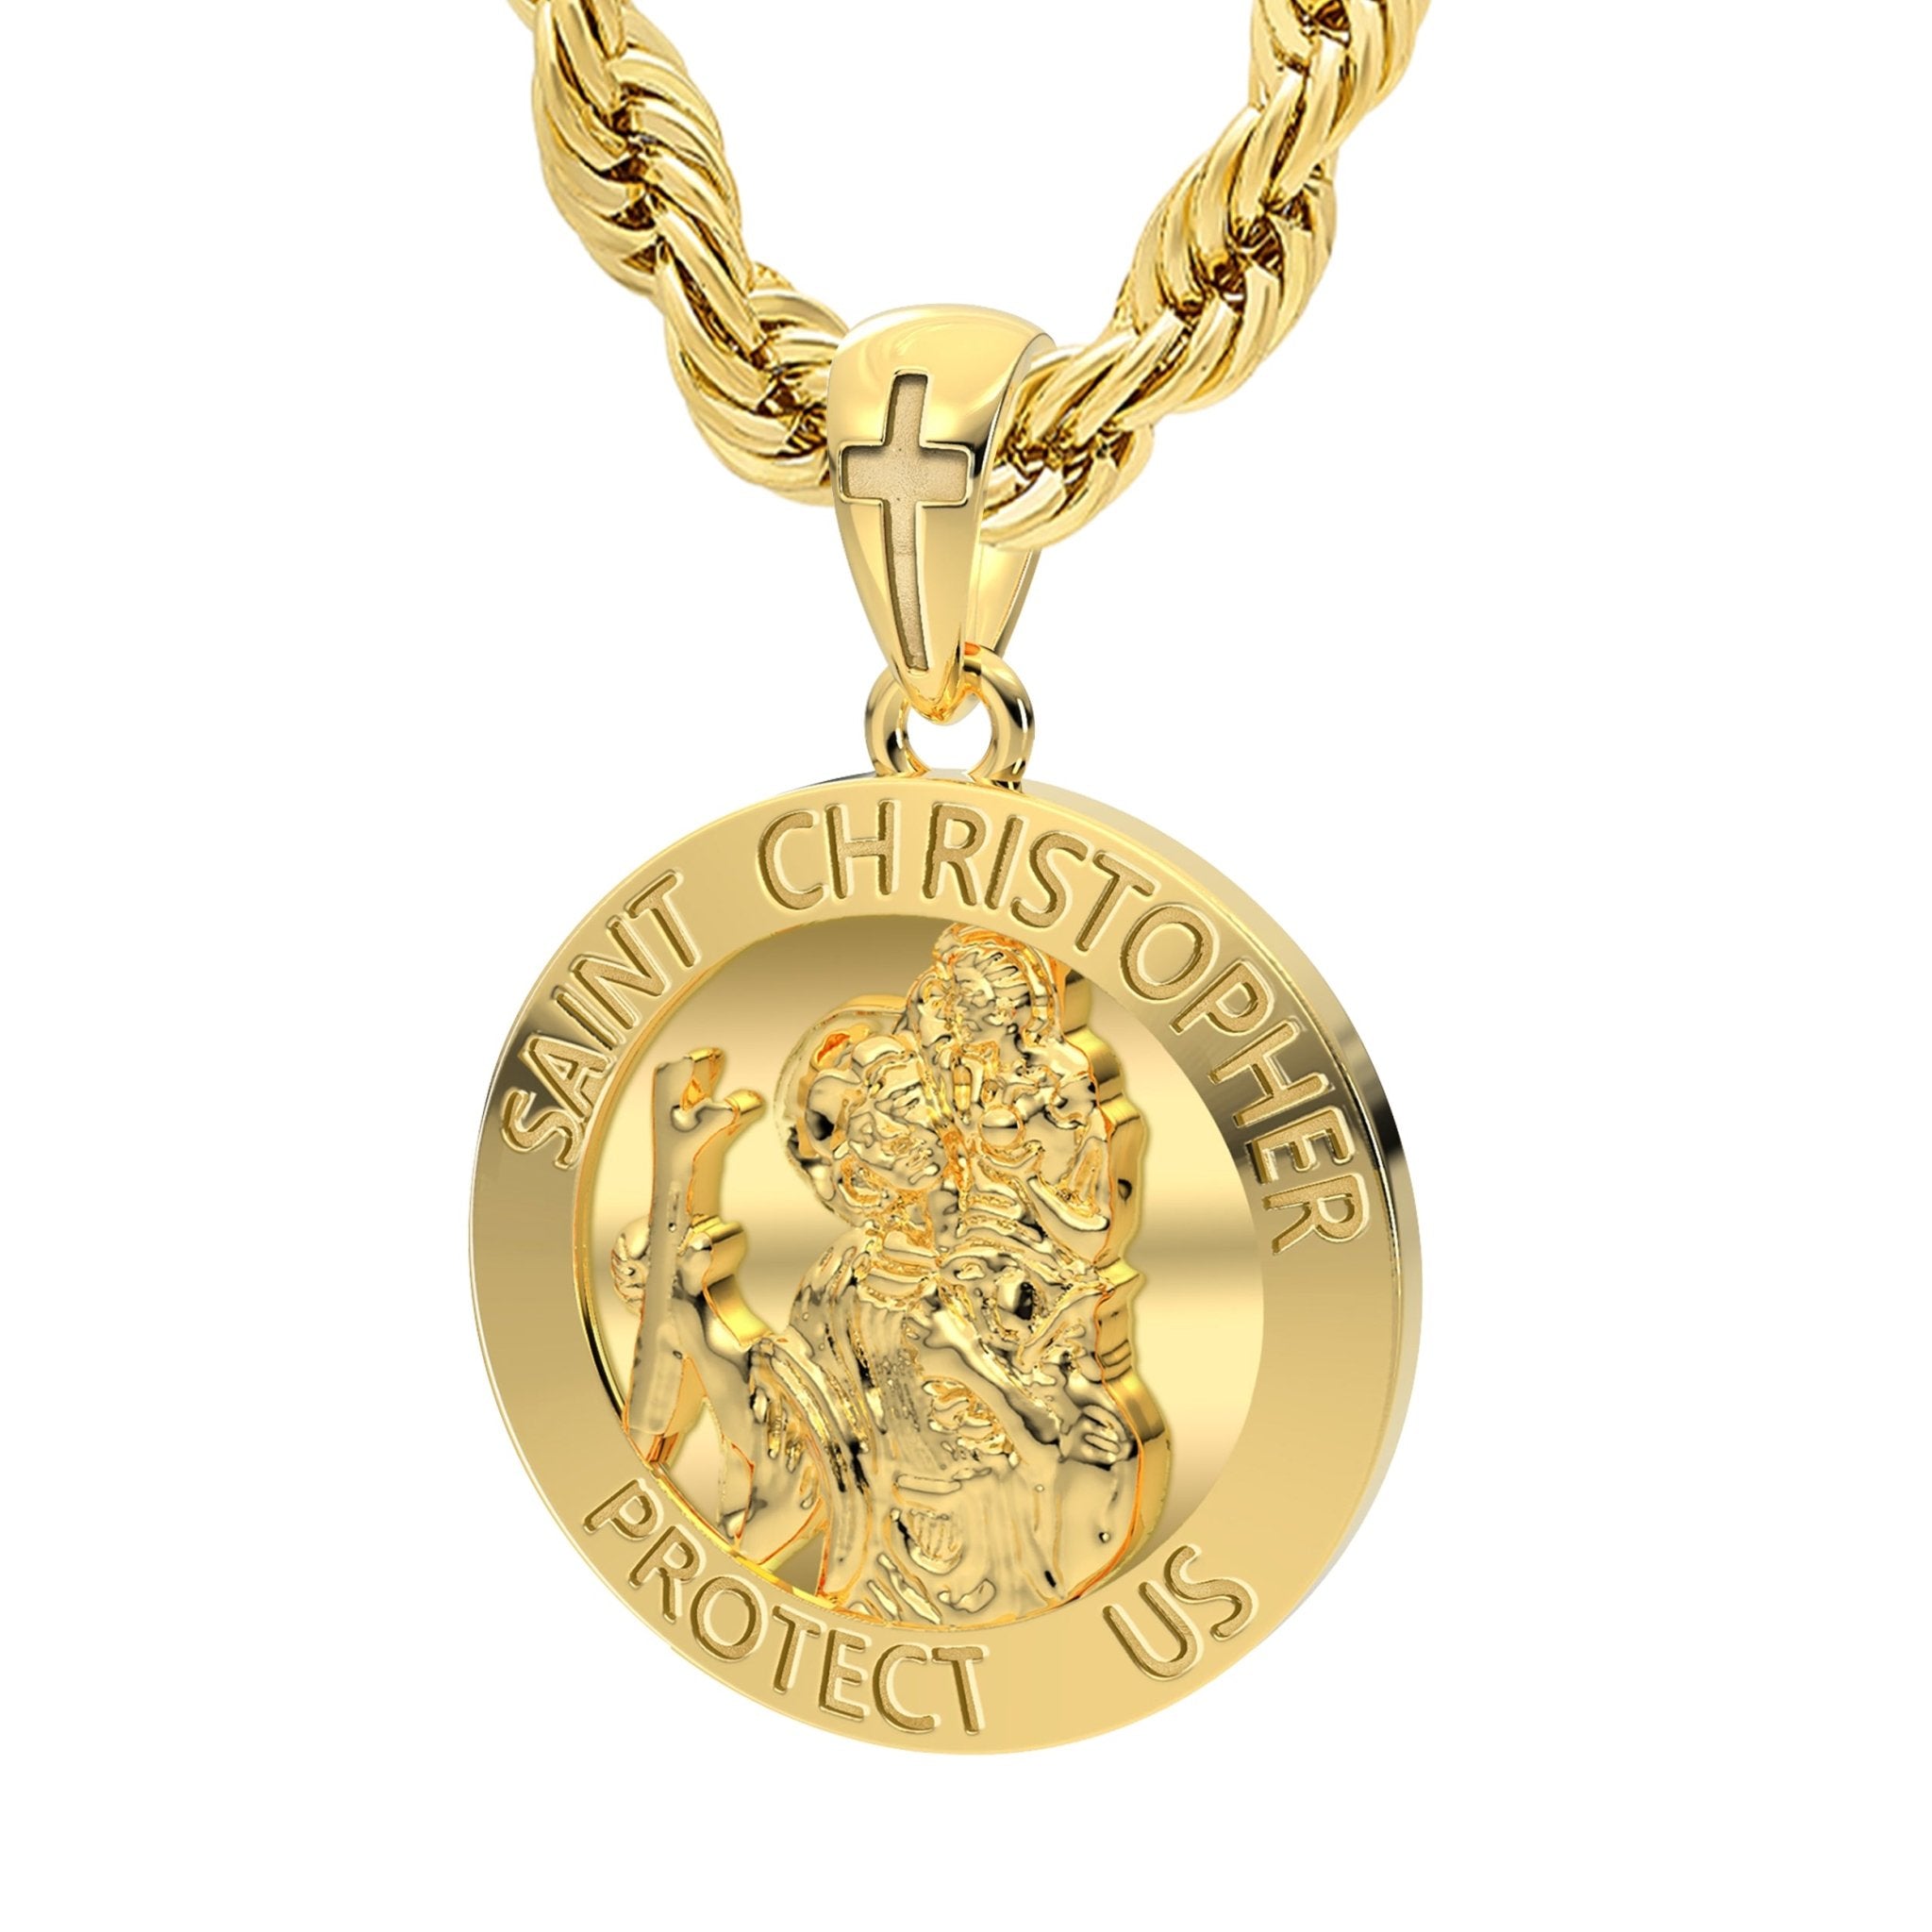 St Christopher Necklace - Round Pendant Necklace In Gold